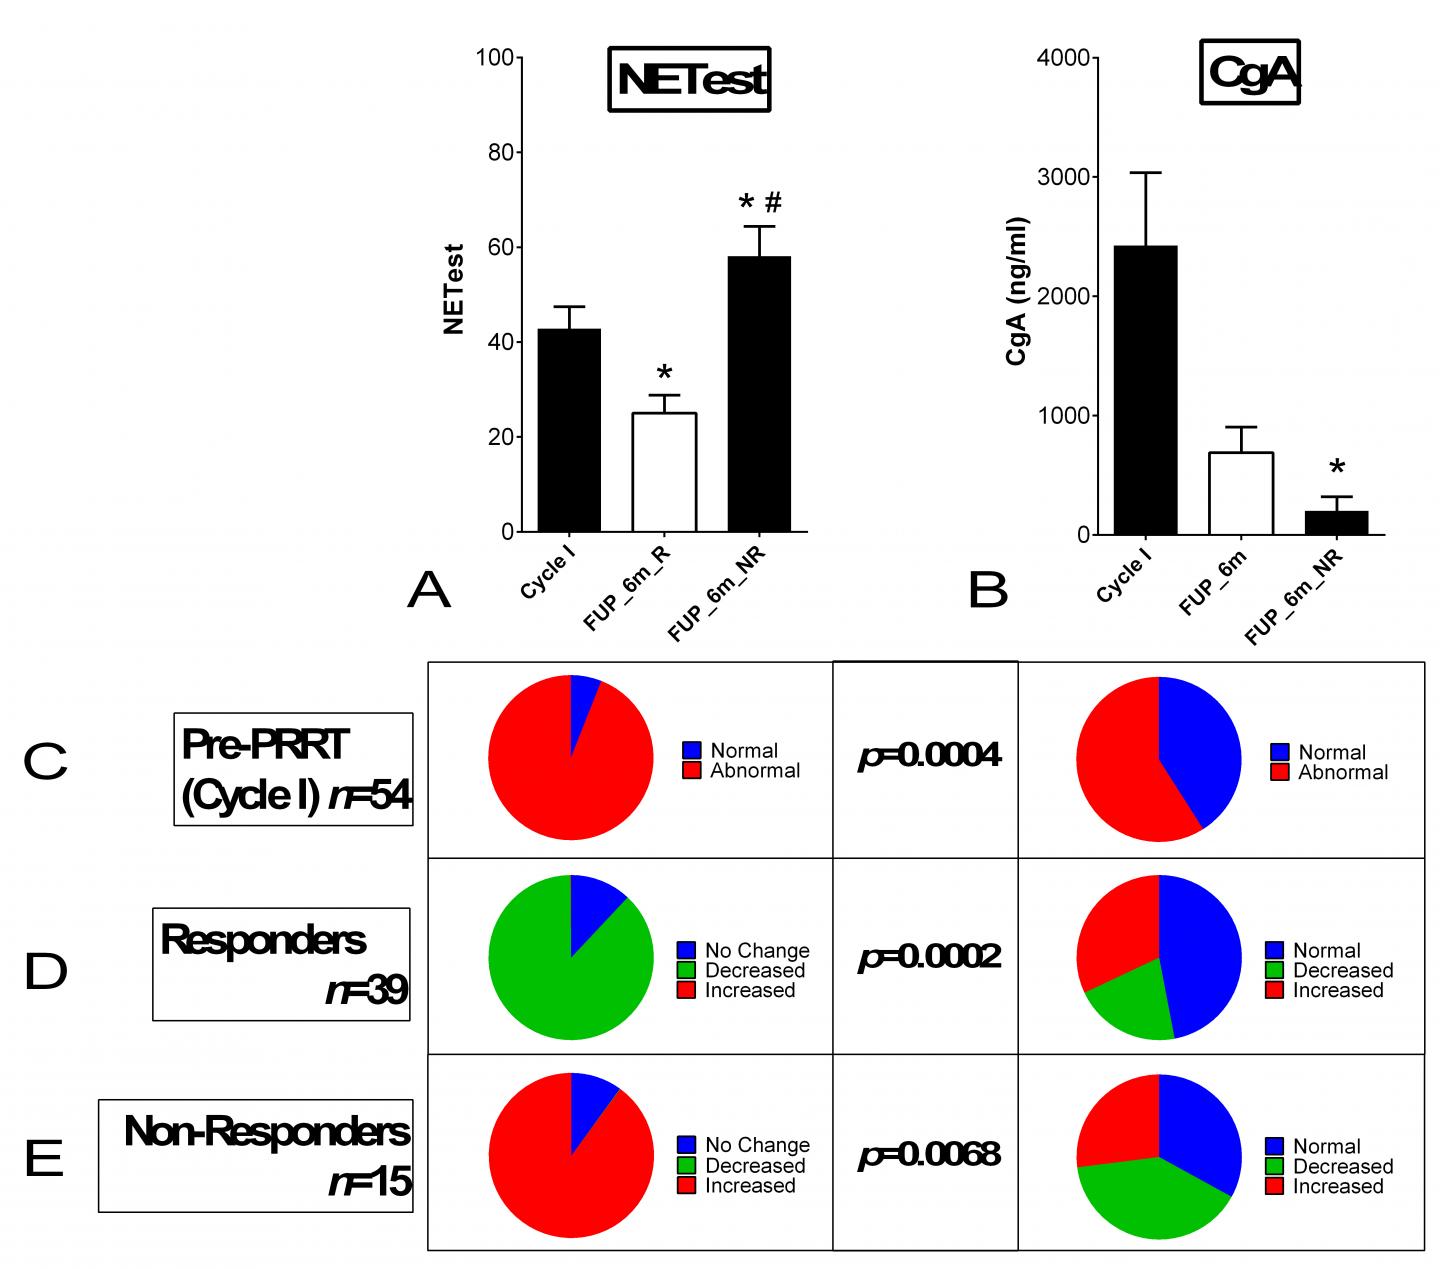 NET Circulating Transcript and Chromogranin A (CgA) Levels in Responders and Non-Responders